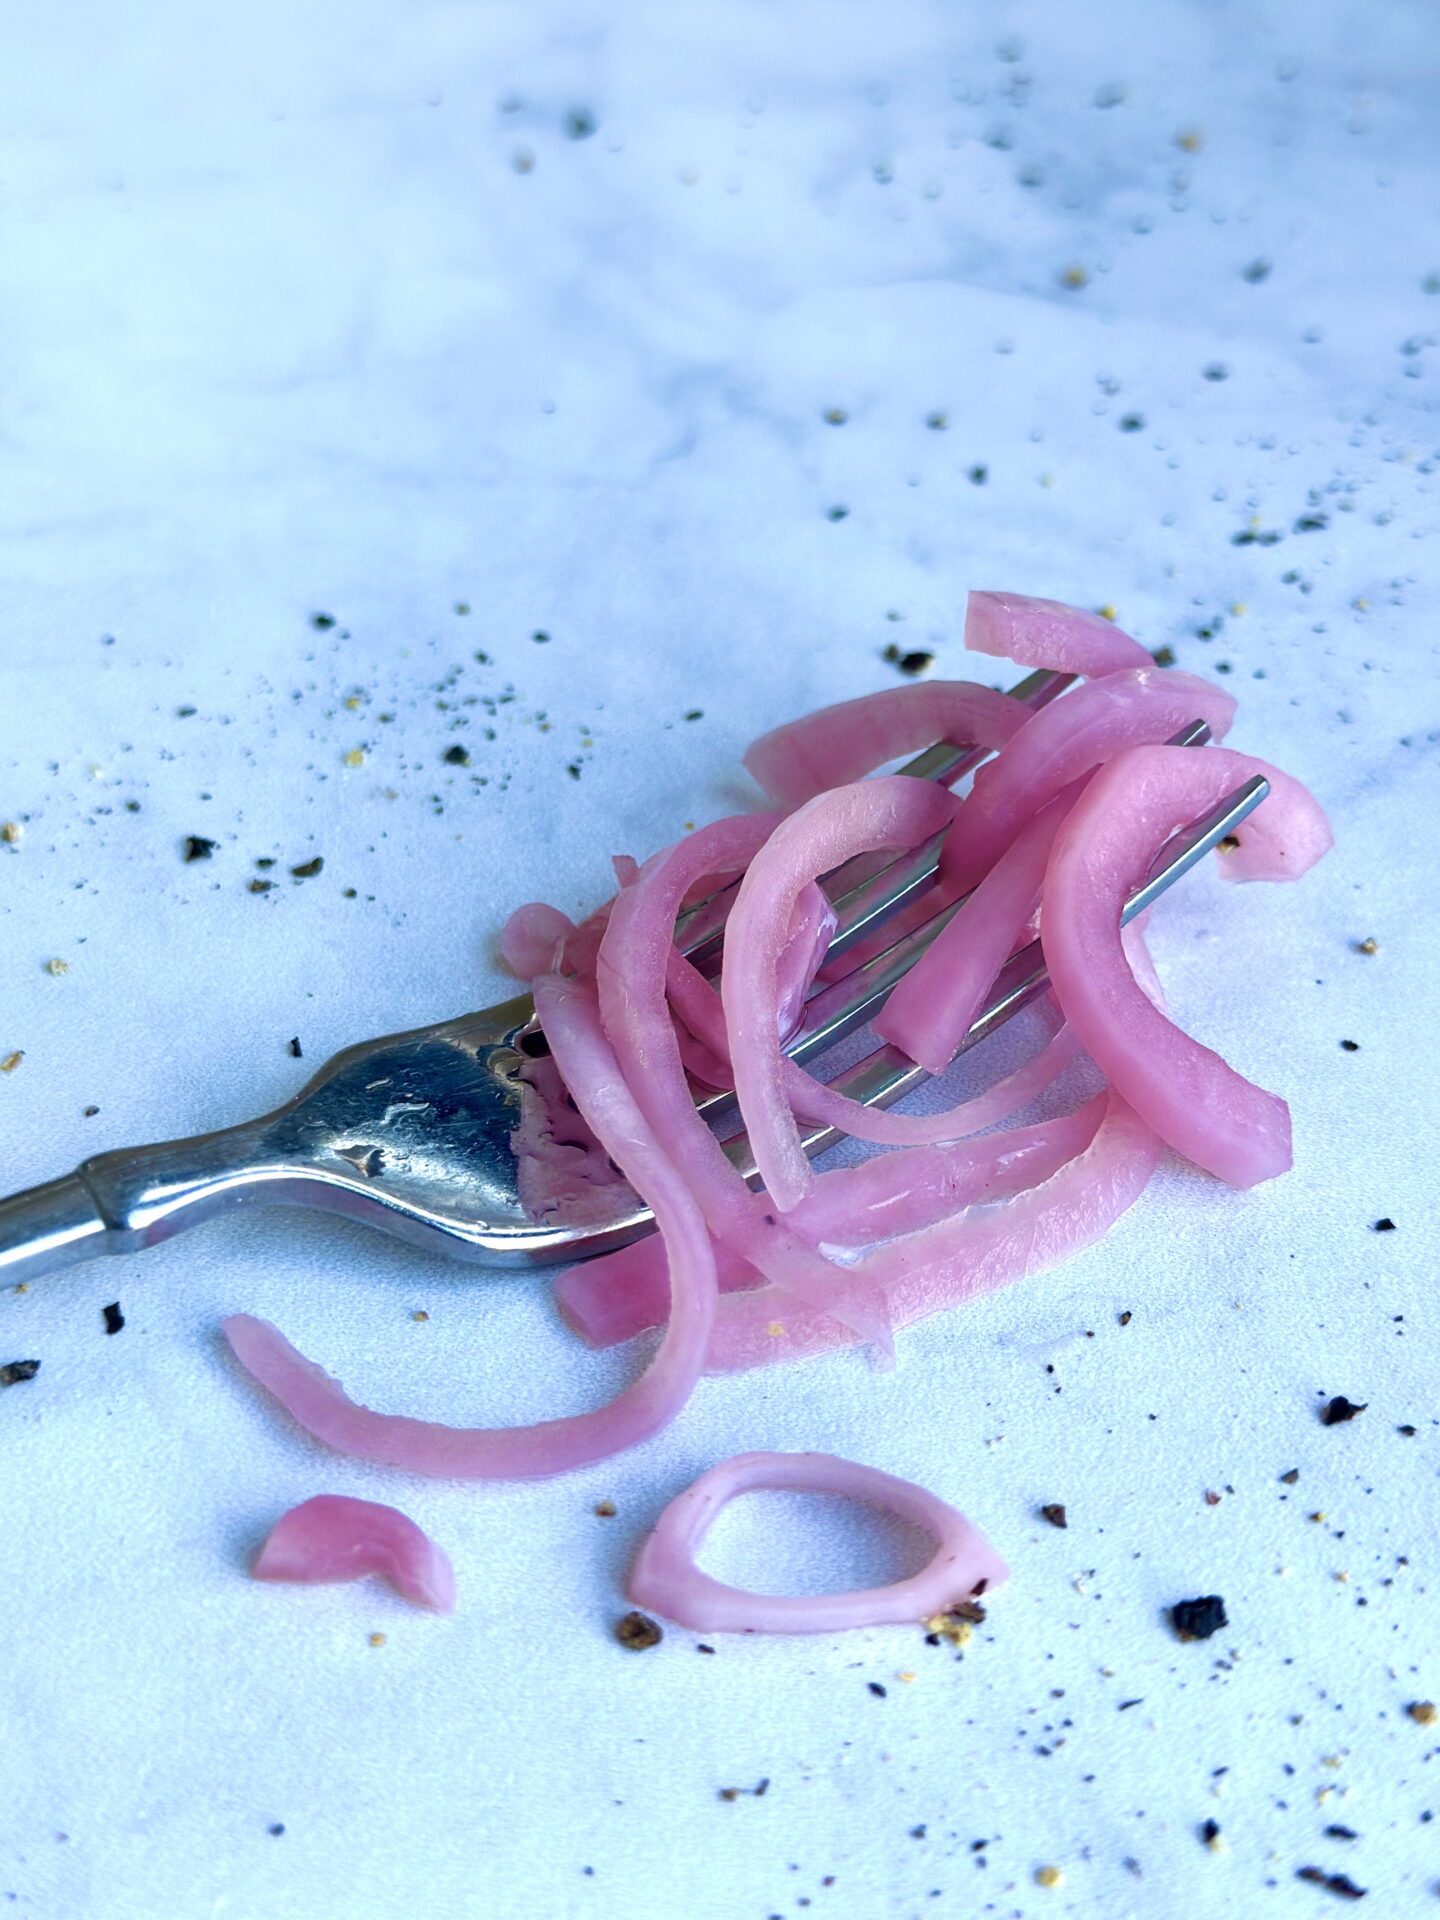 A forkful of tangled bright pink pickled red onions sits on a white marble table